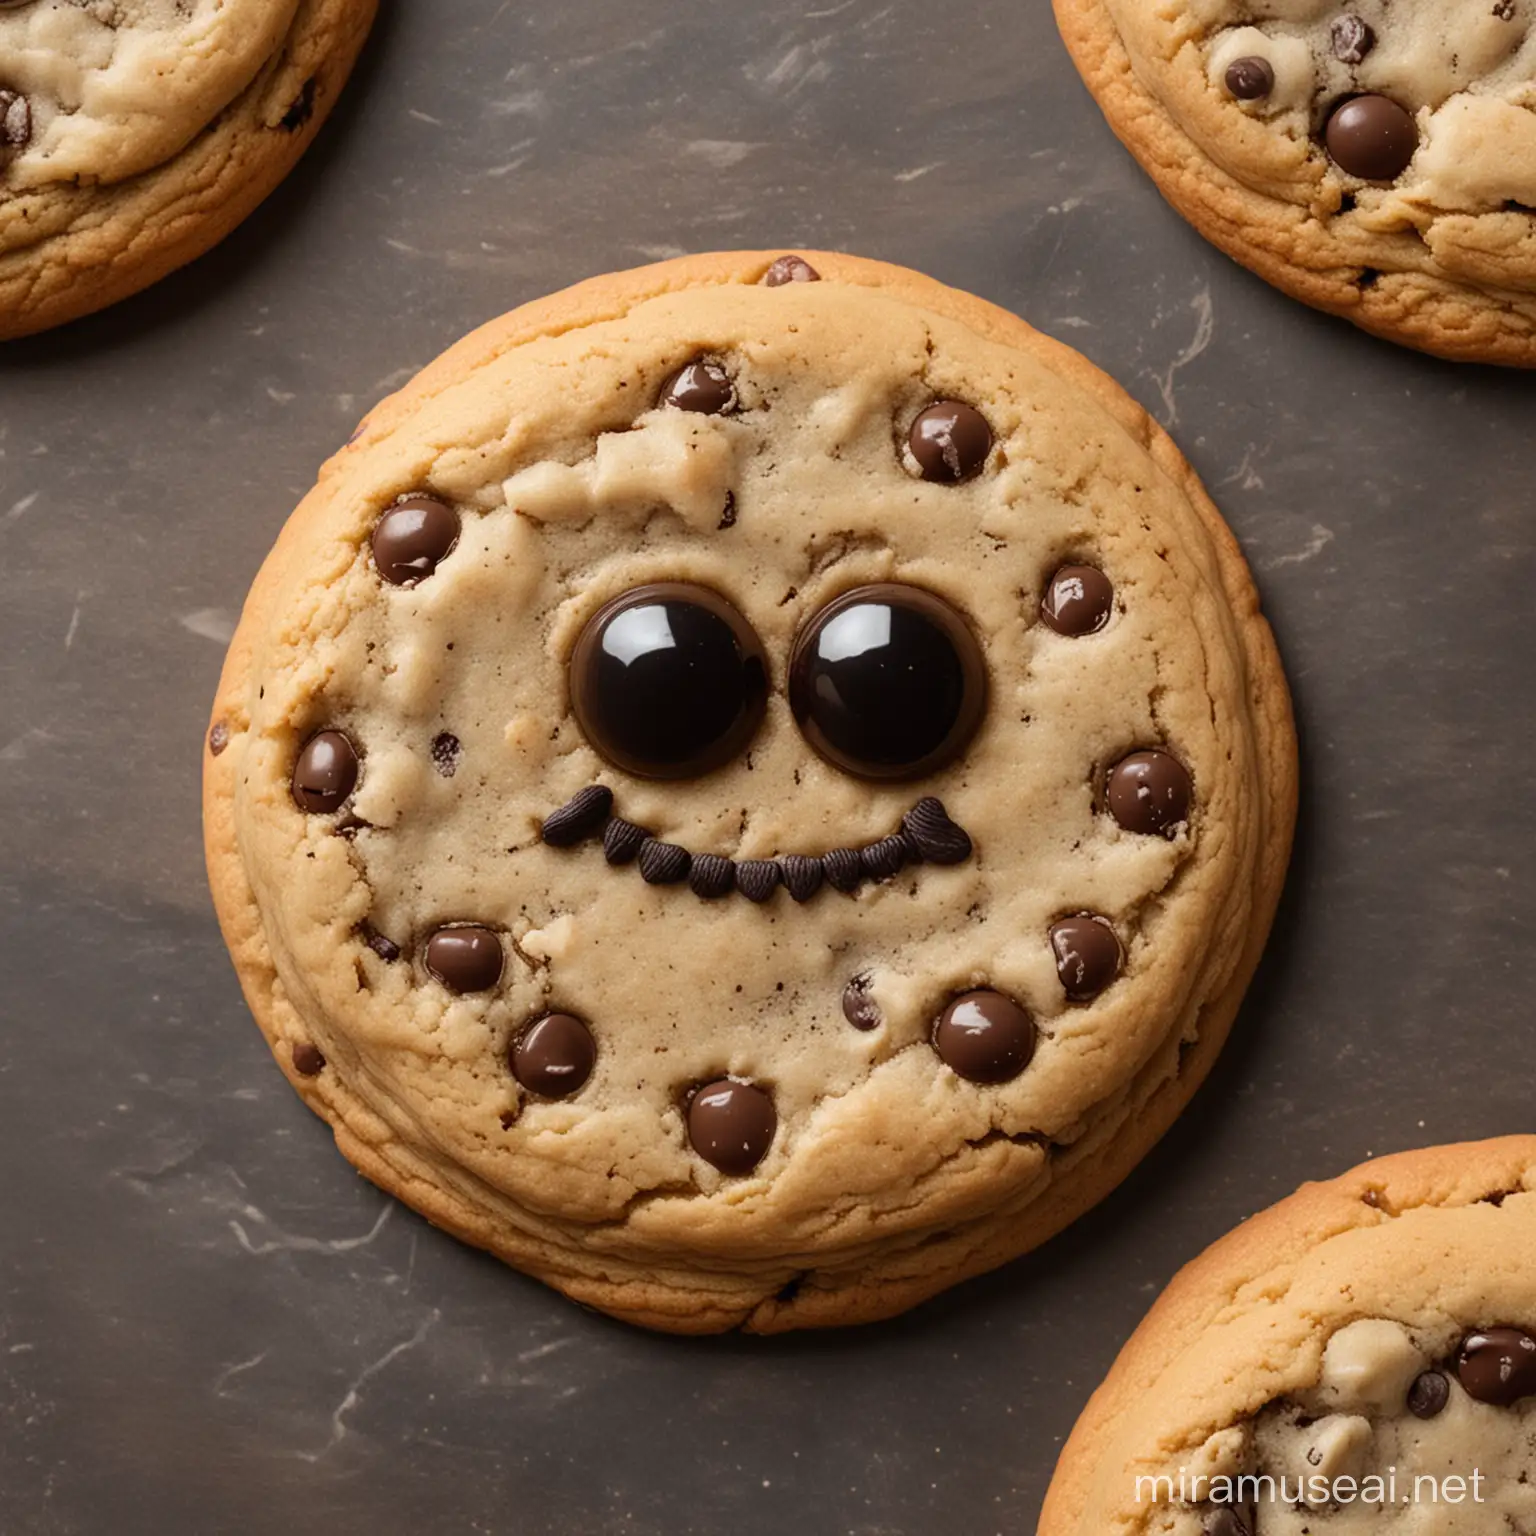 Chocolate Chip Cookie Character with Arms and a Black Eye